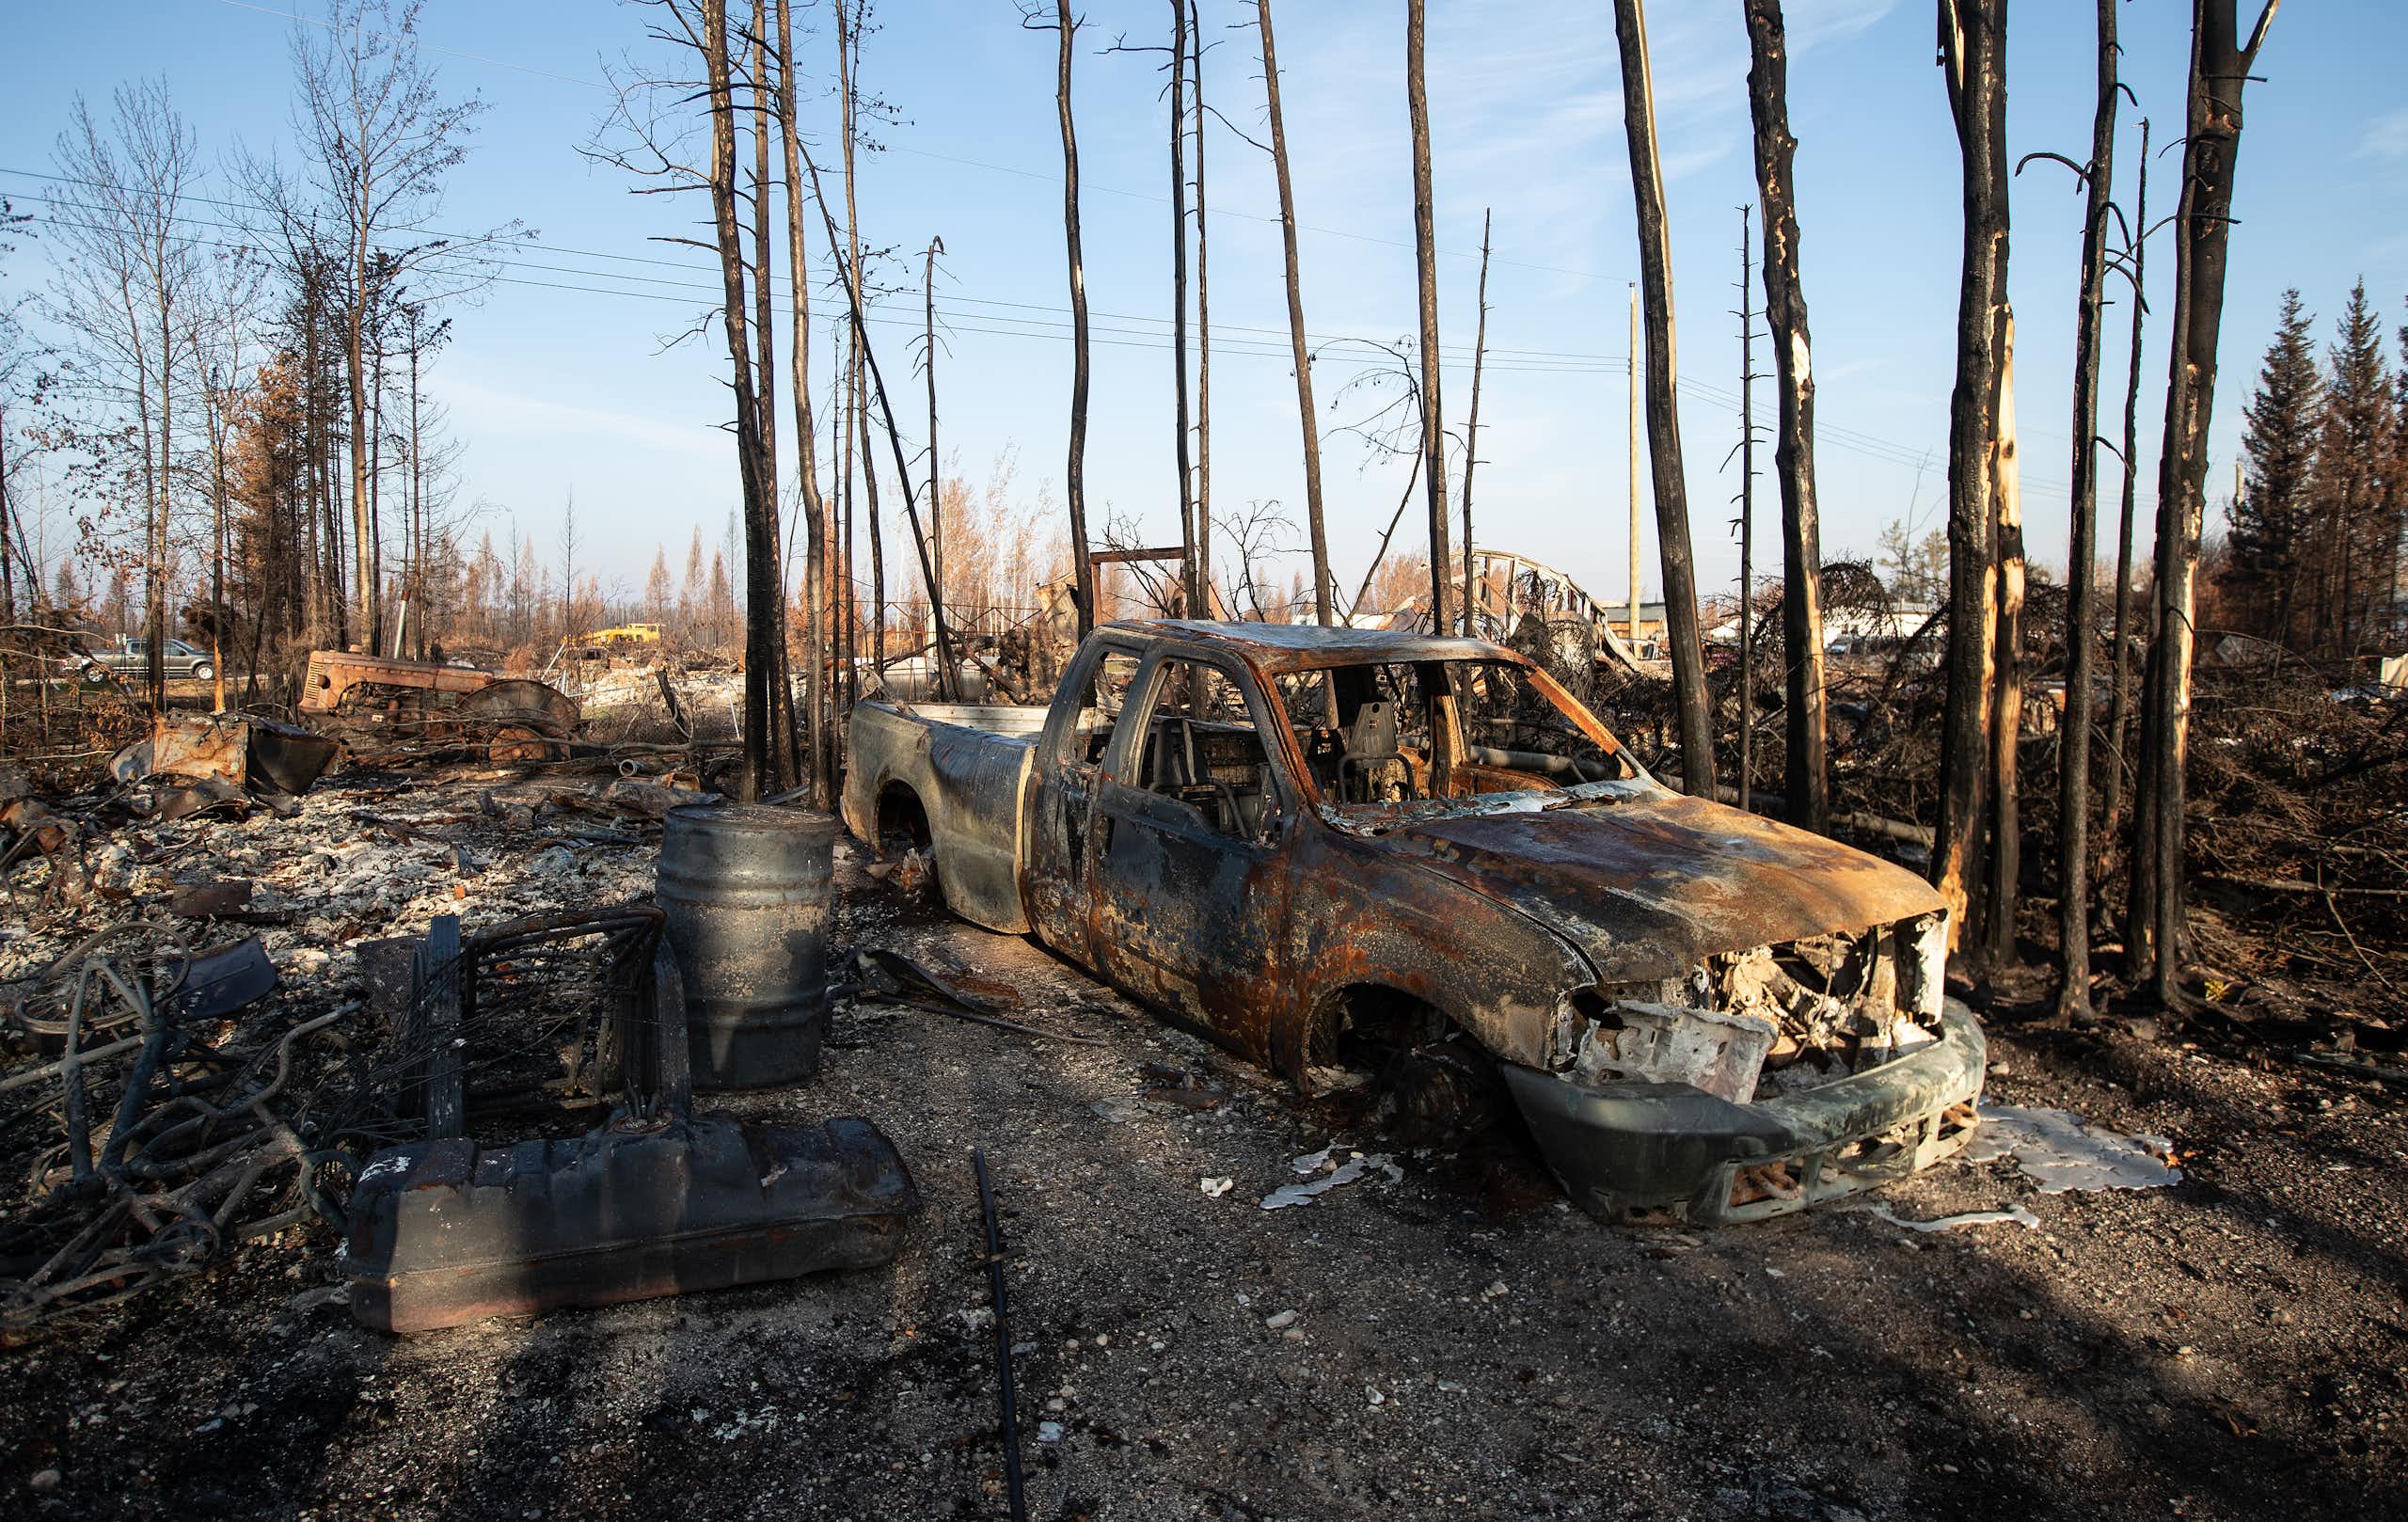 A burned out truck and assorted rubble is seen in the aftermath of a forest fire.